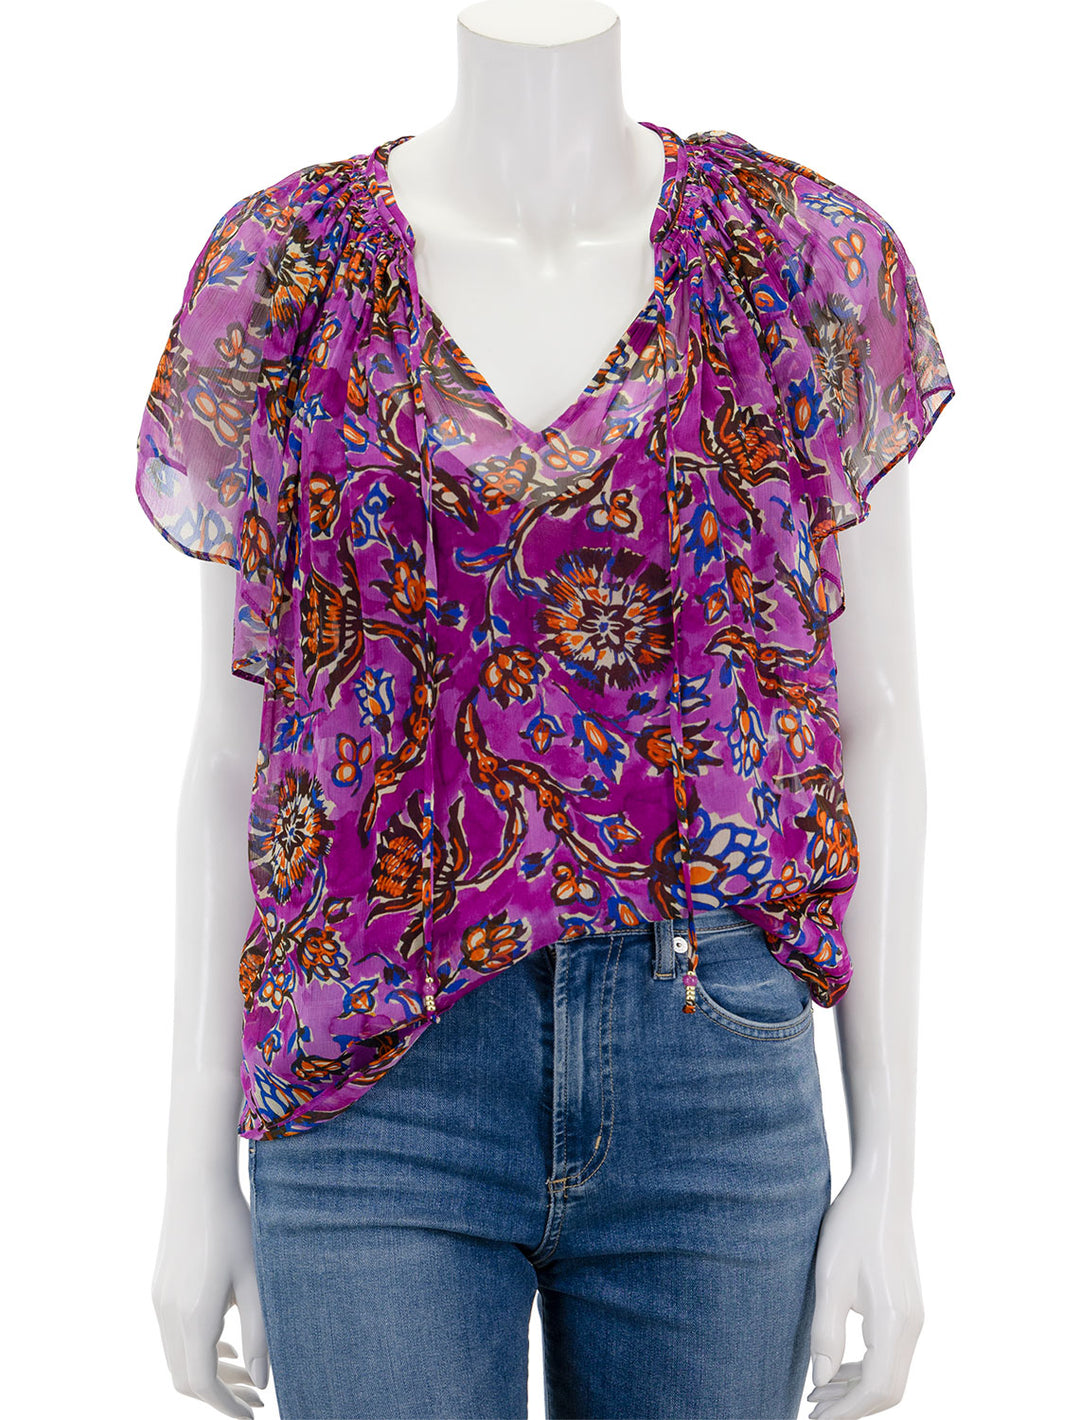 Front view of Vanessa Bruno's cantin top in violet floral.